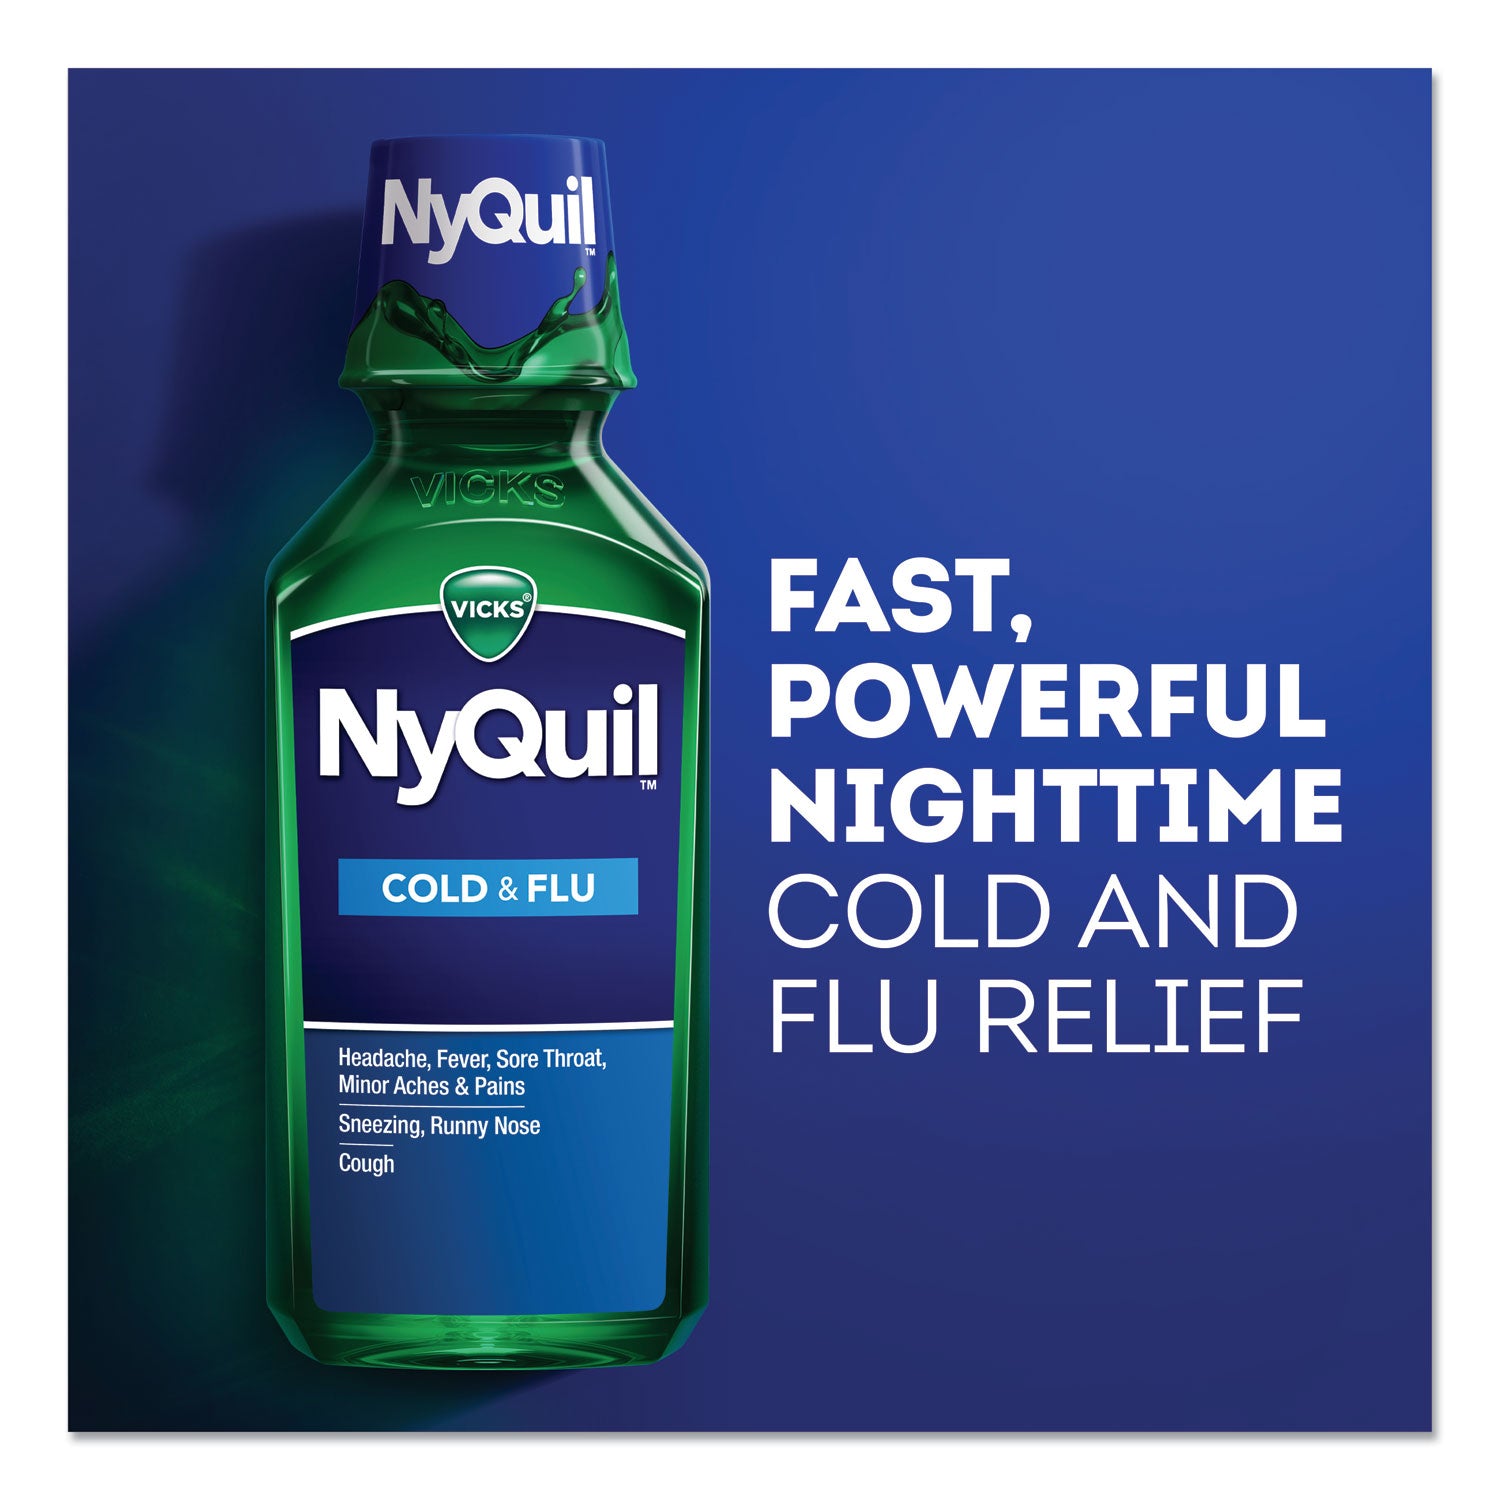 nyquil-cold-and-flu-nighttime-liquid-12-oz-bottle-12-carton_pgc01426 - 4